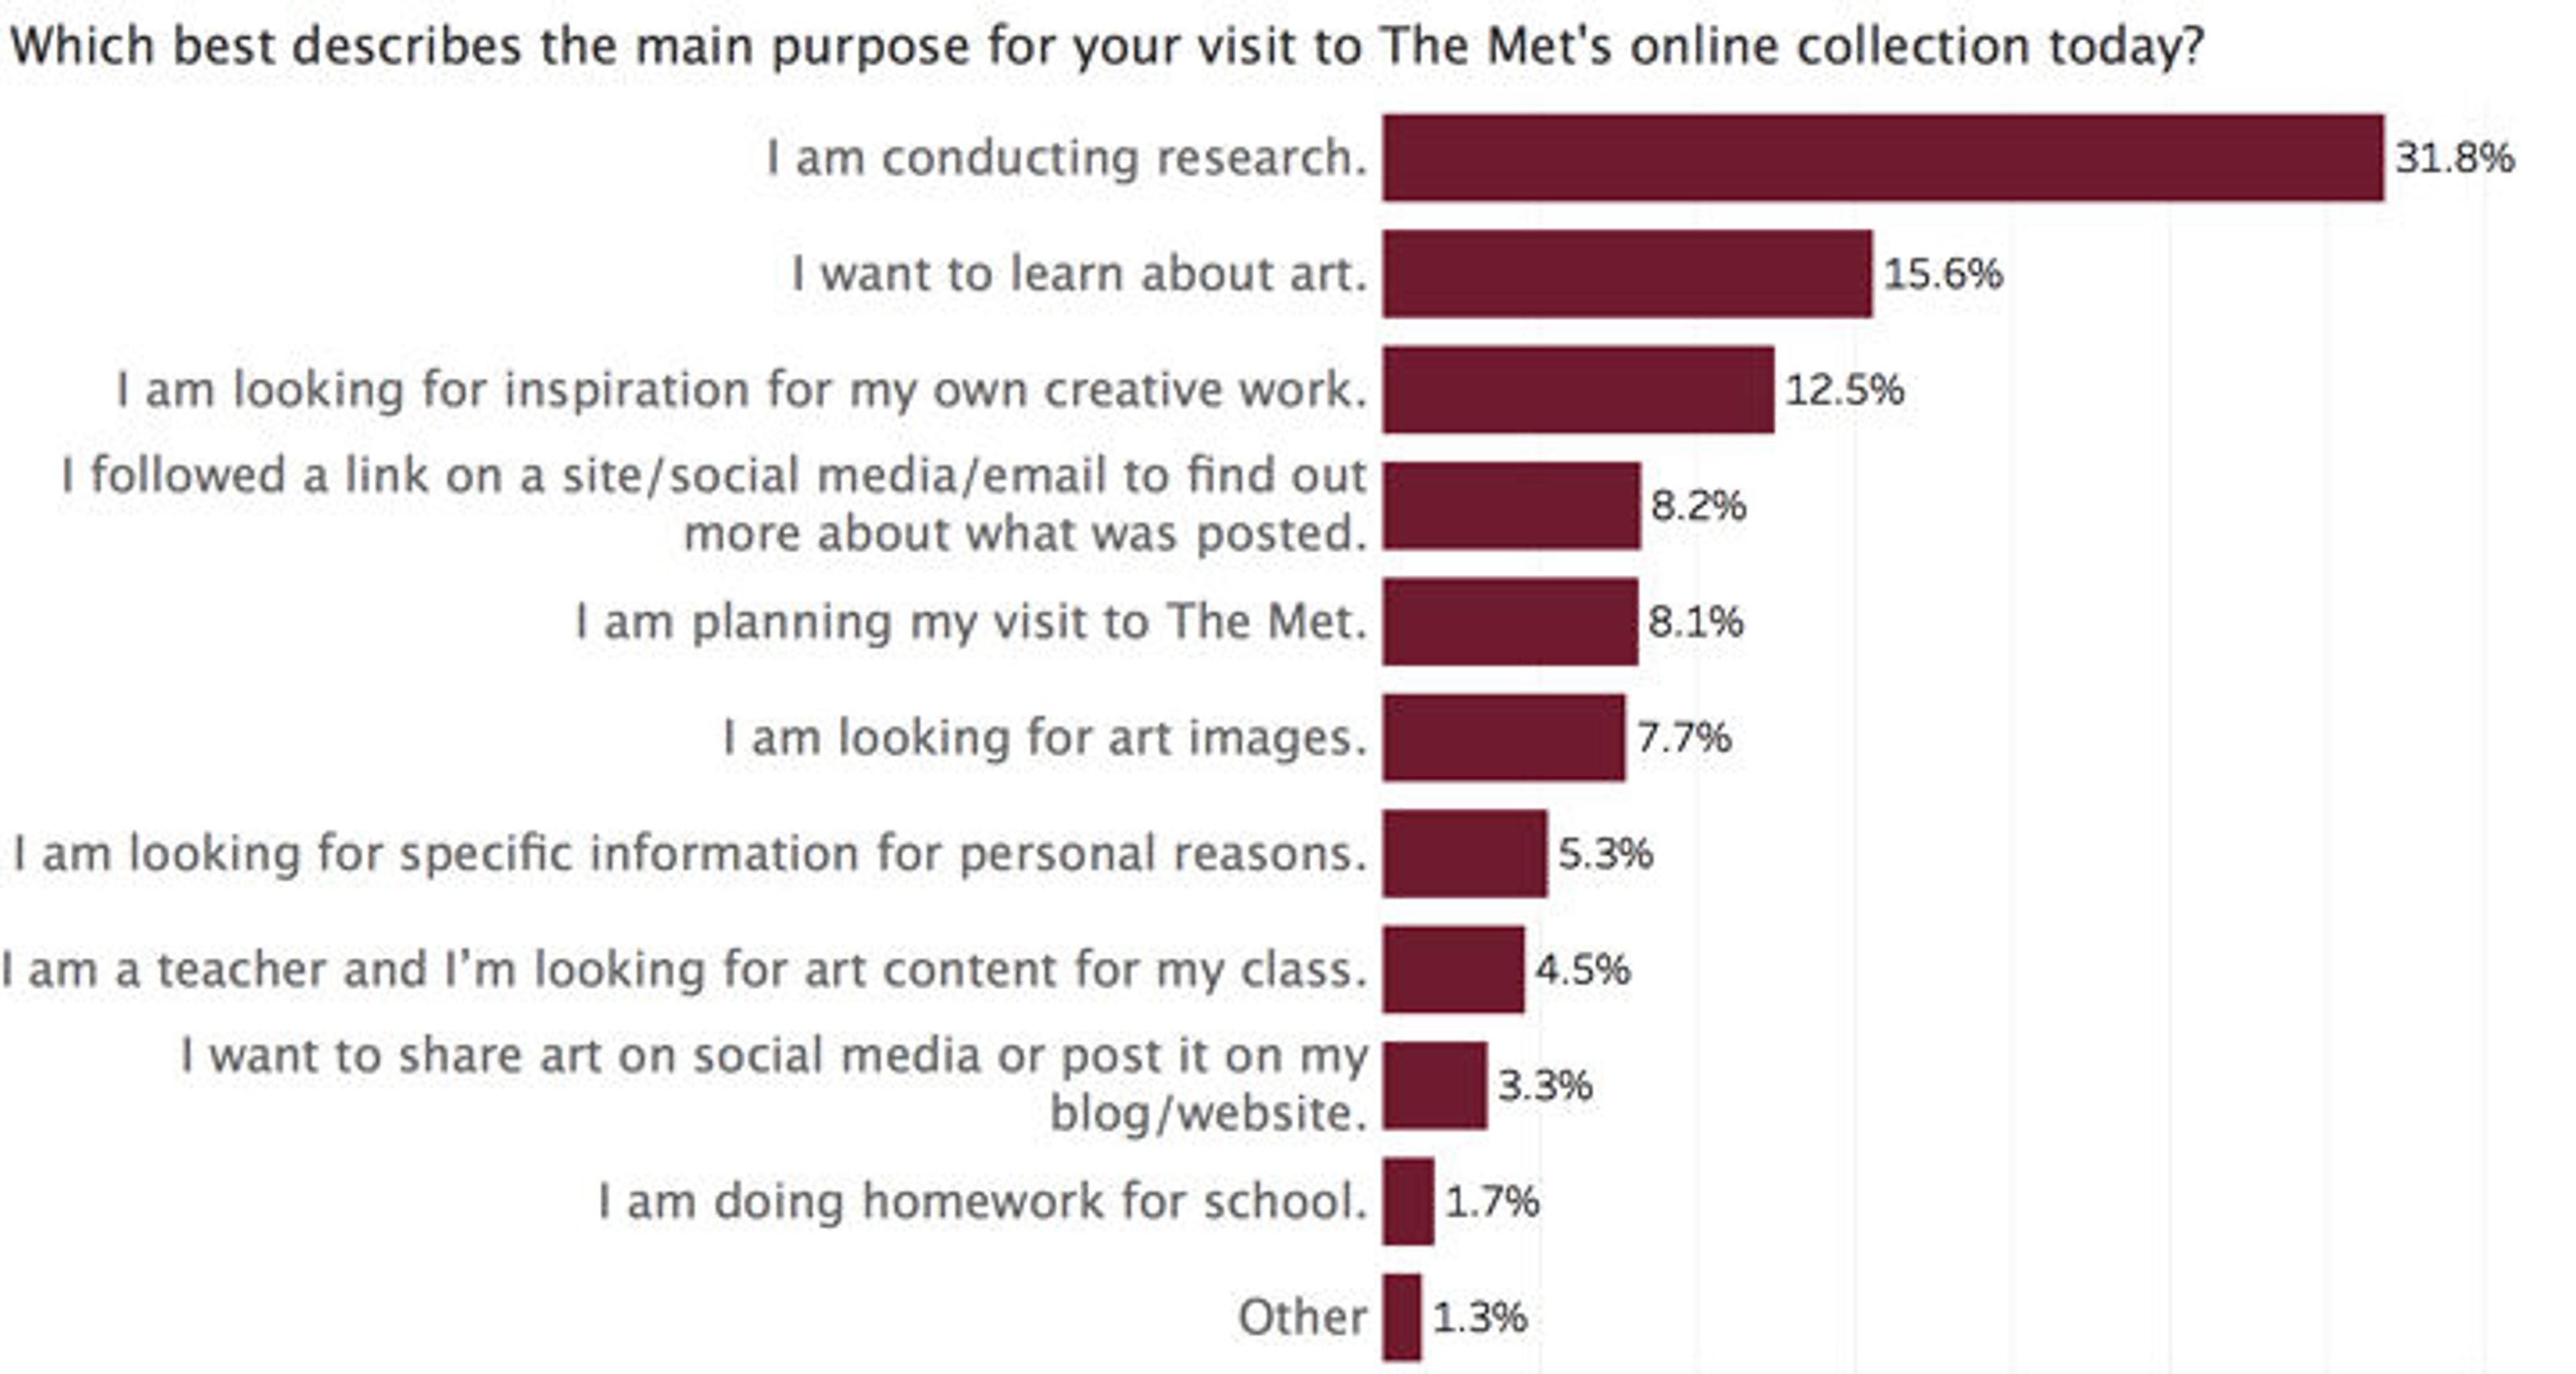 Answers to the question: Which best describes the main purpose for your visit to The Met's online collection today?